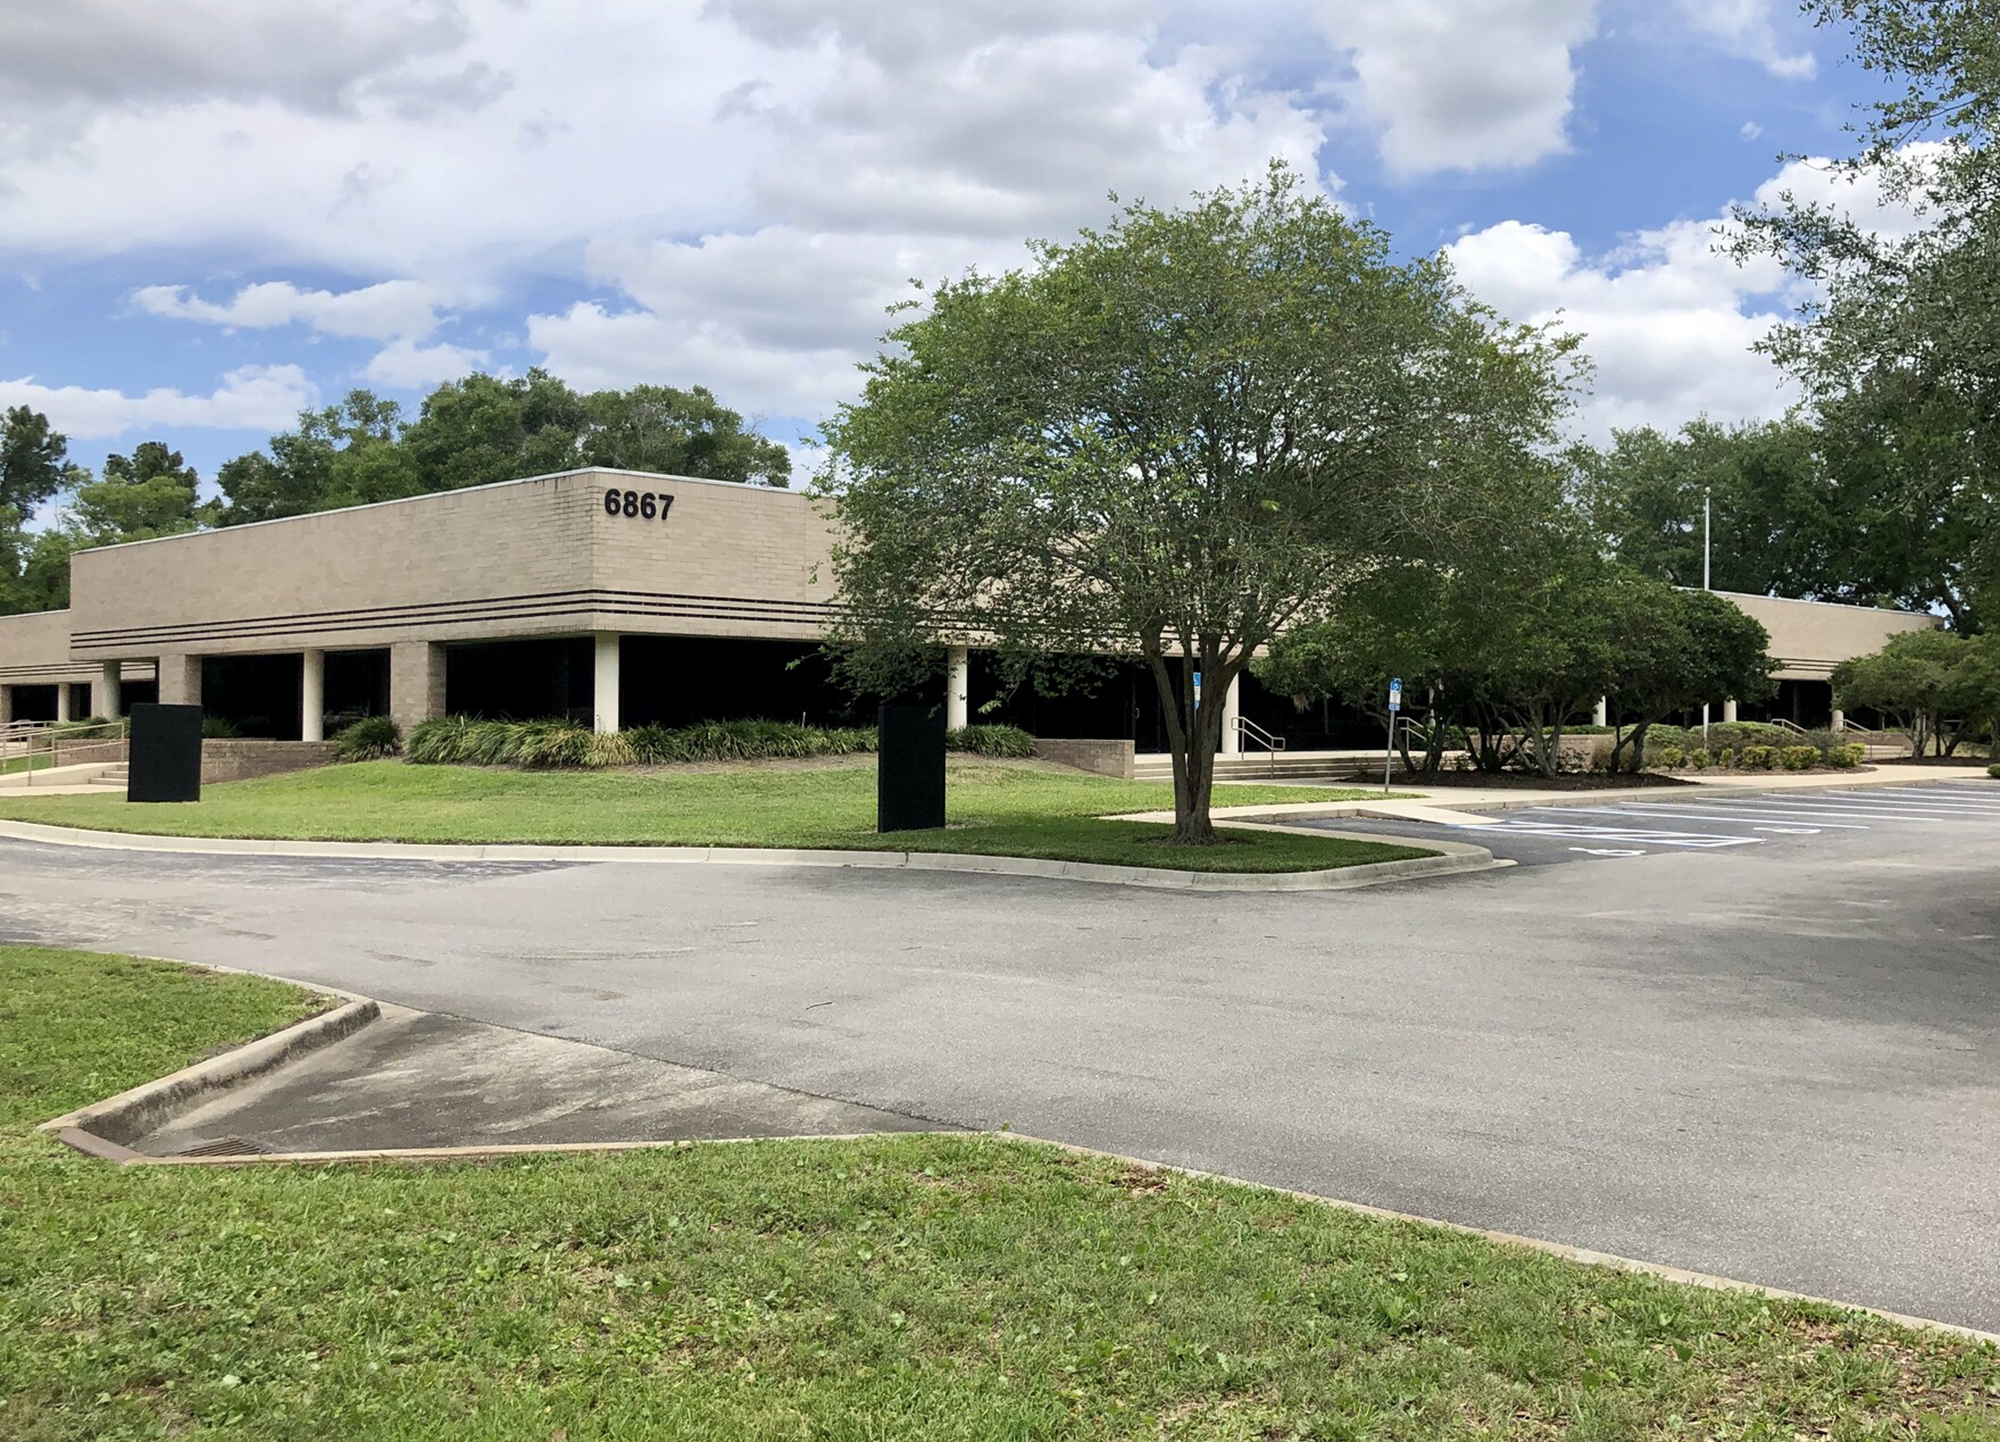 First Coast Energy paid $3.025 million May 14 for a 37,850-square-foot single-story Southpoint building at 6867 Southpoint Drive N.